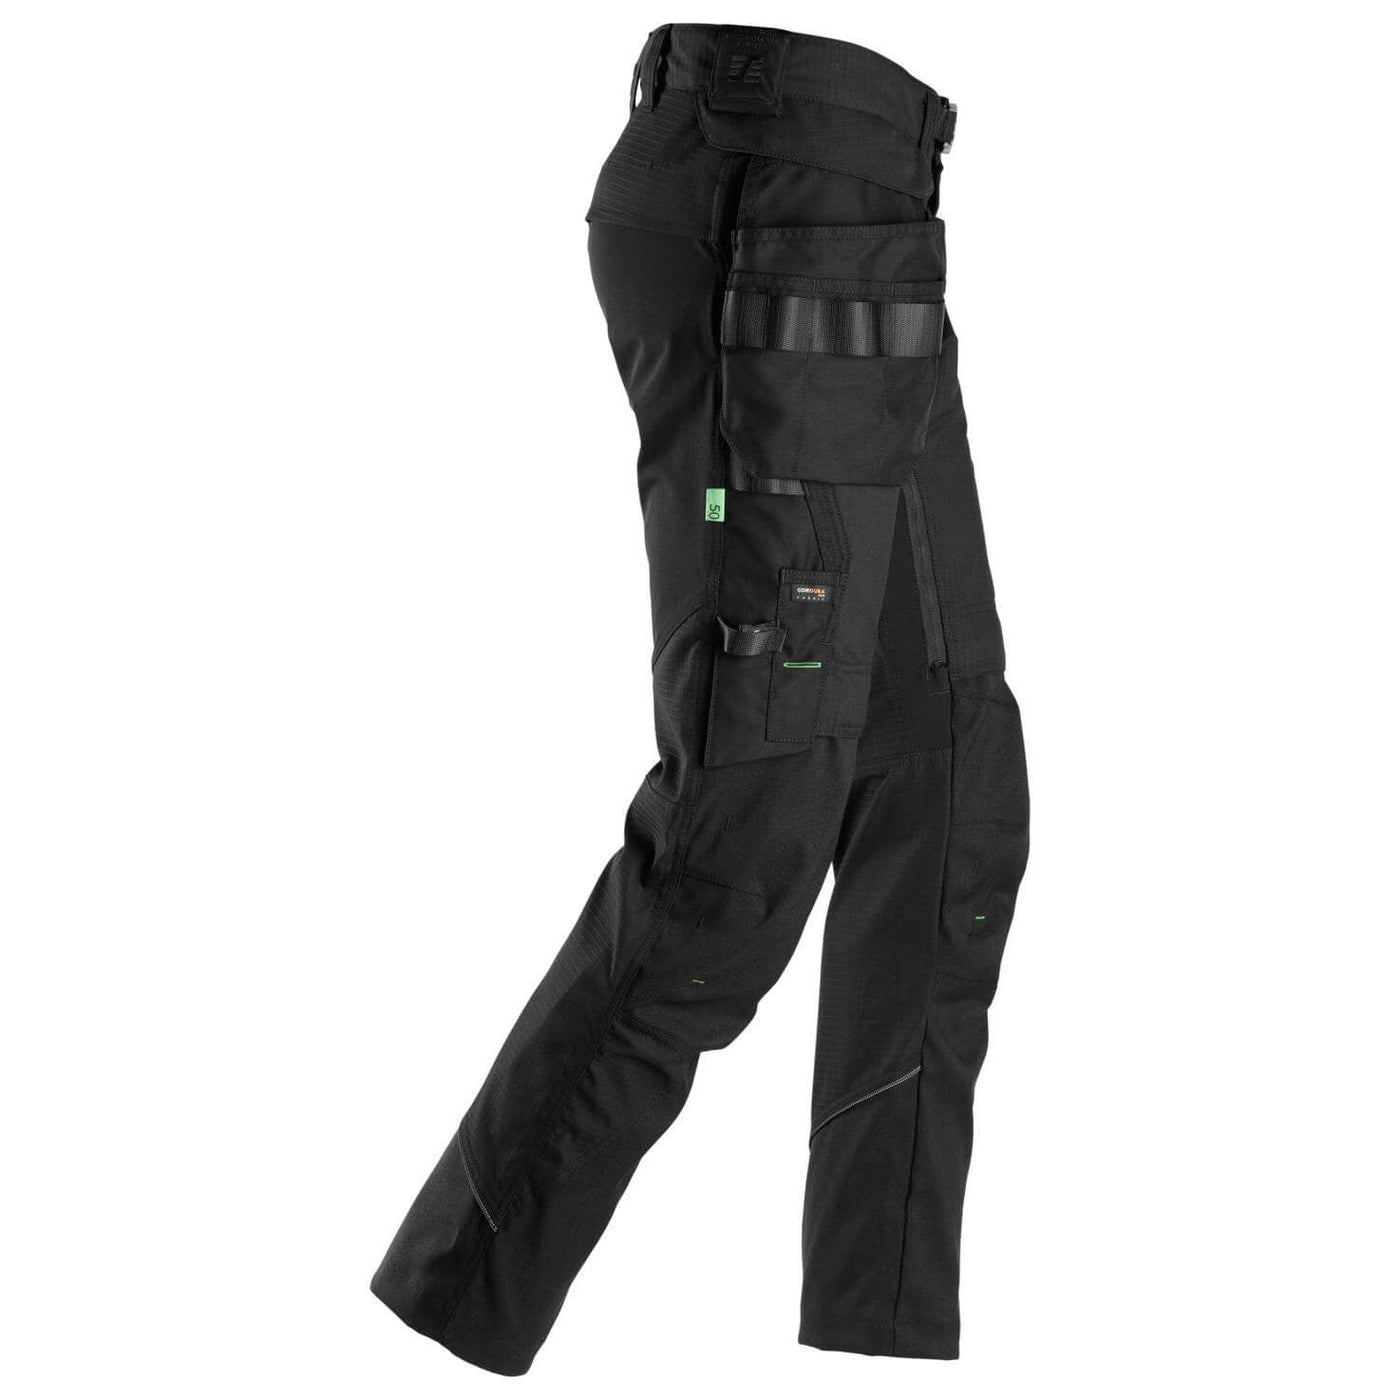 Snickers 6972 Slim Fit Ripstop Work Trousers with Detachable Holster Pockets Black Black right #colour_black-black